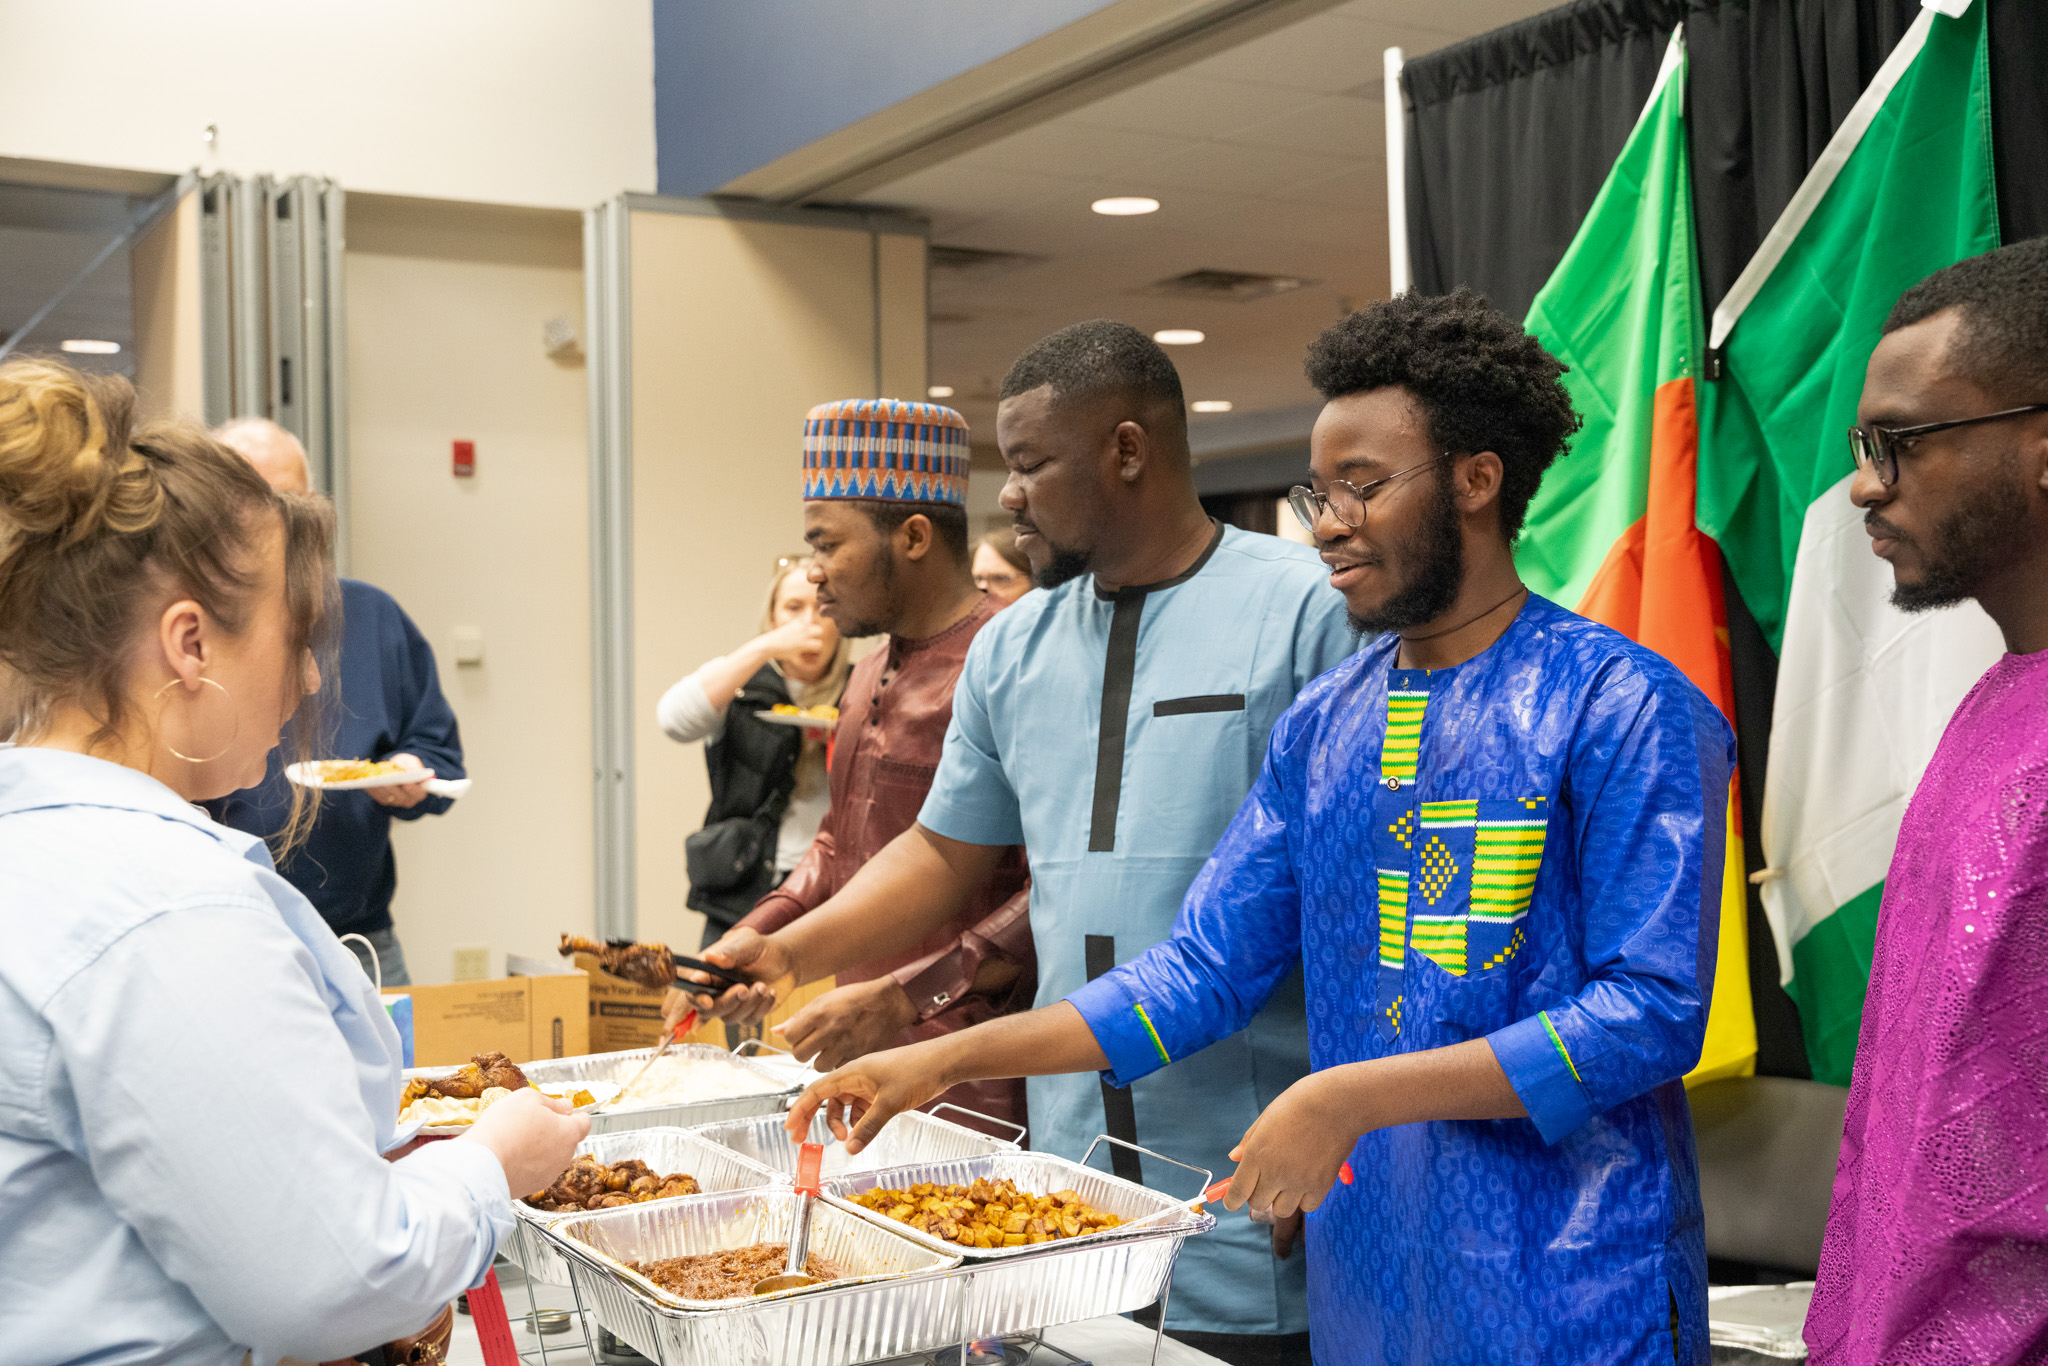 Serving food at the Cultural Expo